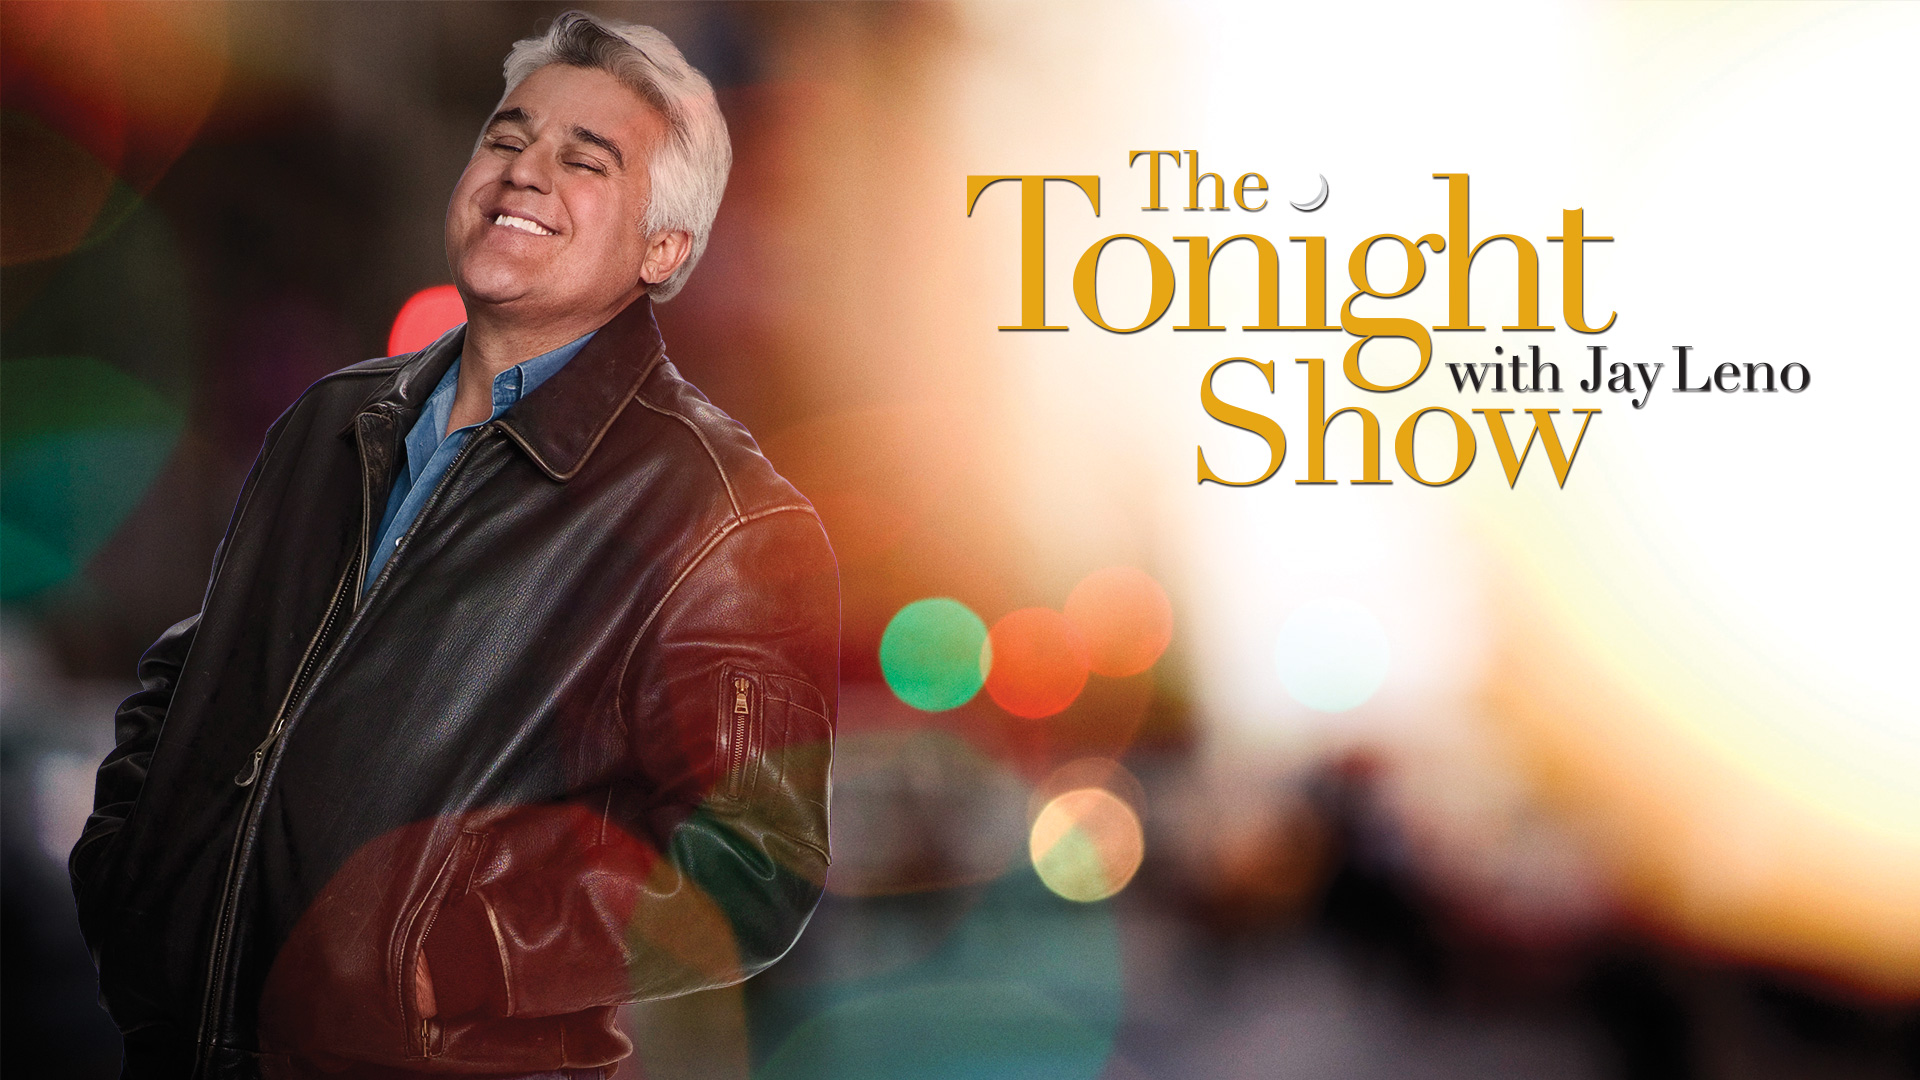 The Tonight Show with Jay Leno | Late Night Comedy | NBC